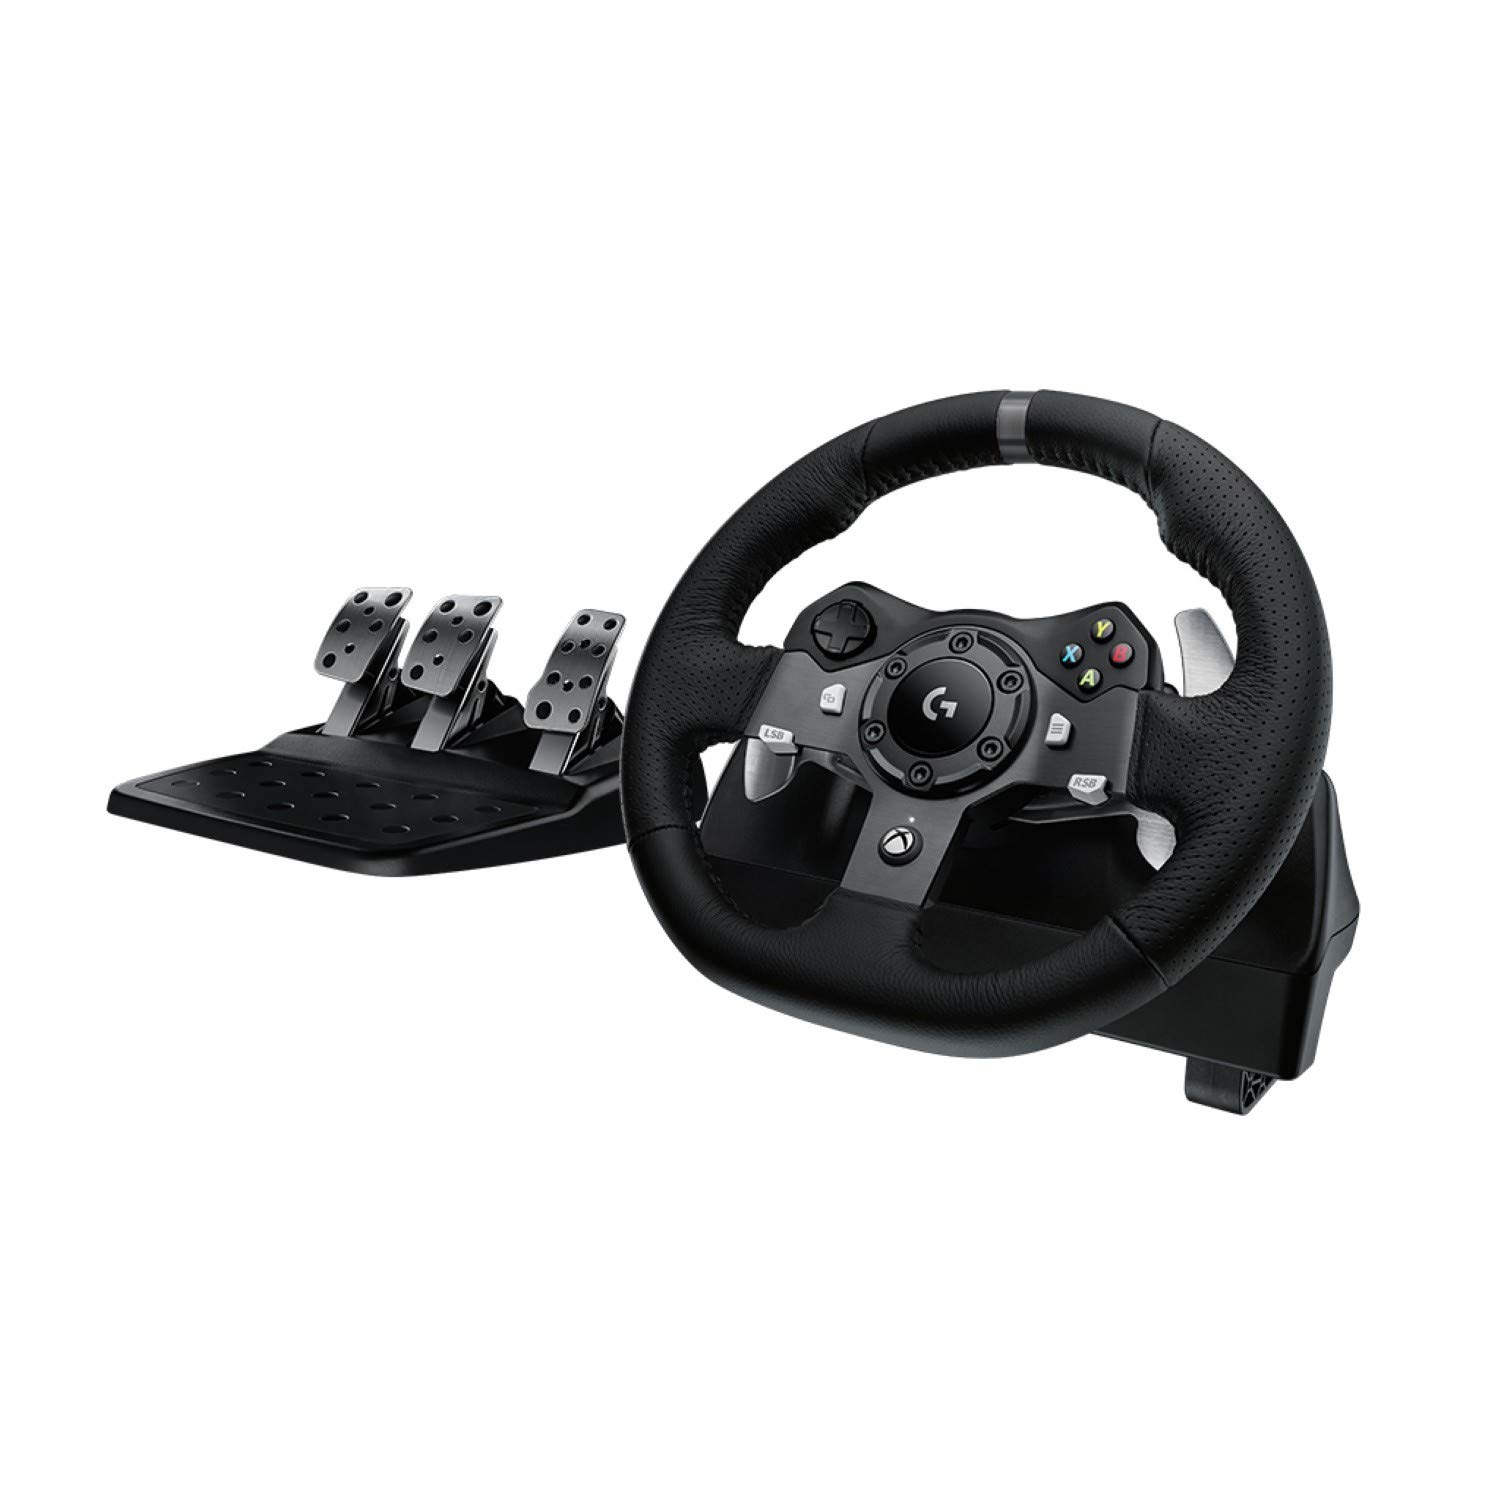 Logitech G920 Driving Force Racing Wheel and Floor Pedals, Real Force Feedback, Stainless Steel Paddle Shifters, Leather Steering Wheel Cover for Xbox Series X|S, Xbox On - $242